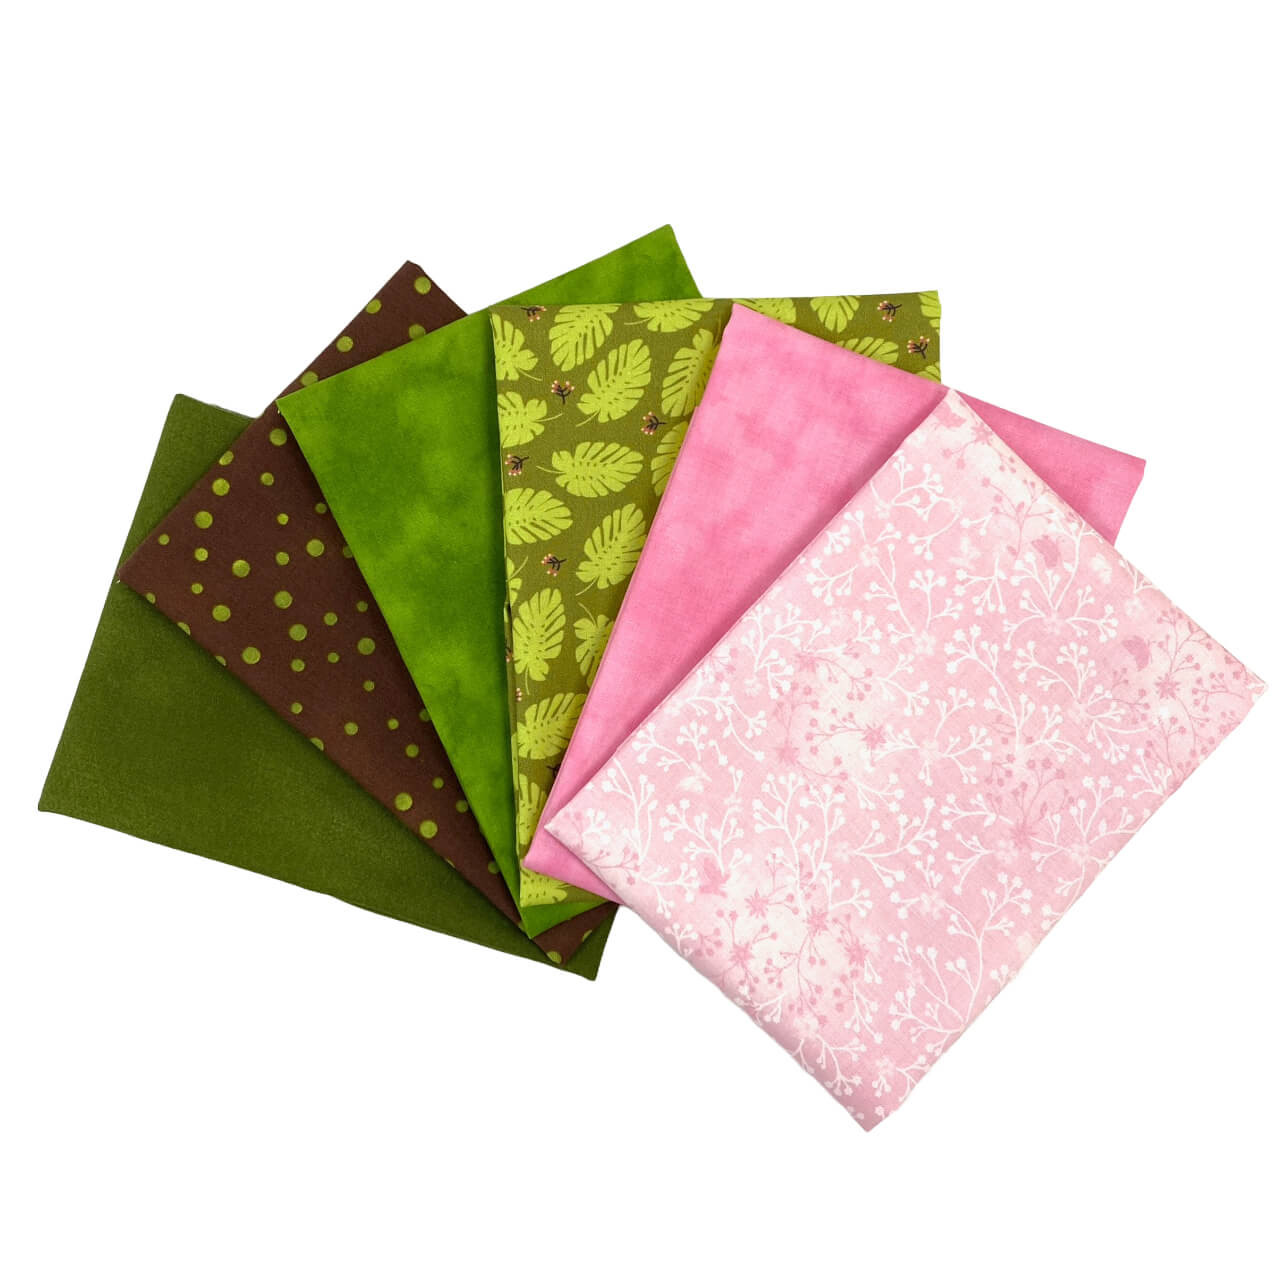 Custom-curated Cottage Garden fat quarter bundle by Benartex & John Jouden, featuring six fabrics in shades of pink and green.